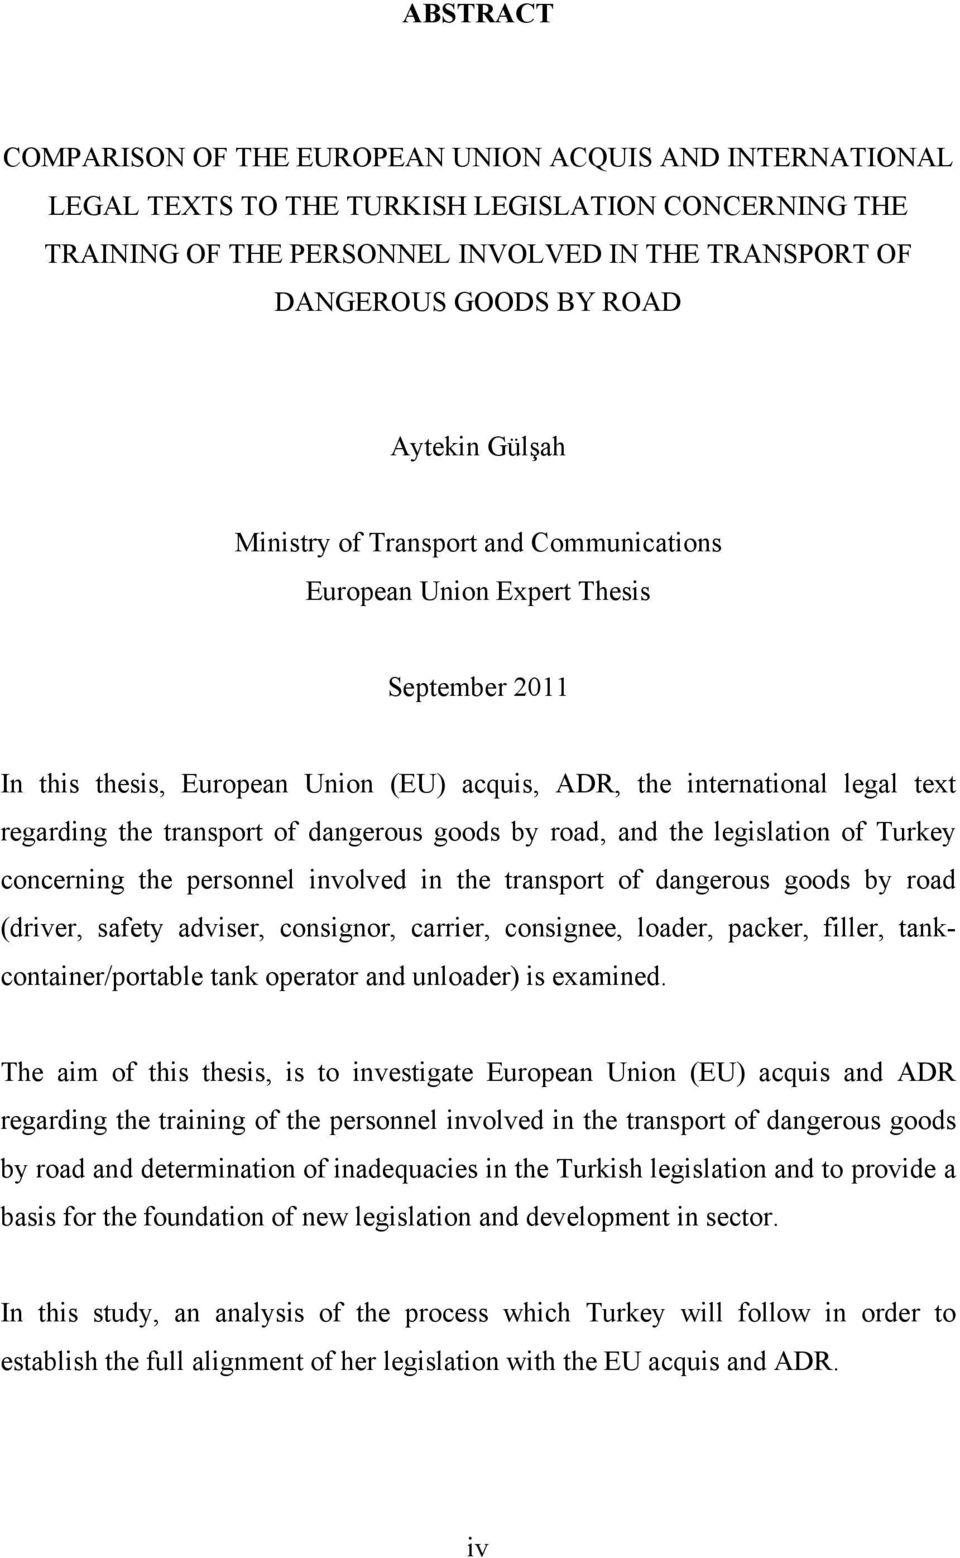 transport of dangerous goods by road, and the legislation of Turkey concerning the personnel involved in the transport of dangerous goods by road (driver, safety adviser, consignor, carrier,